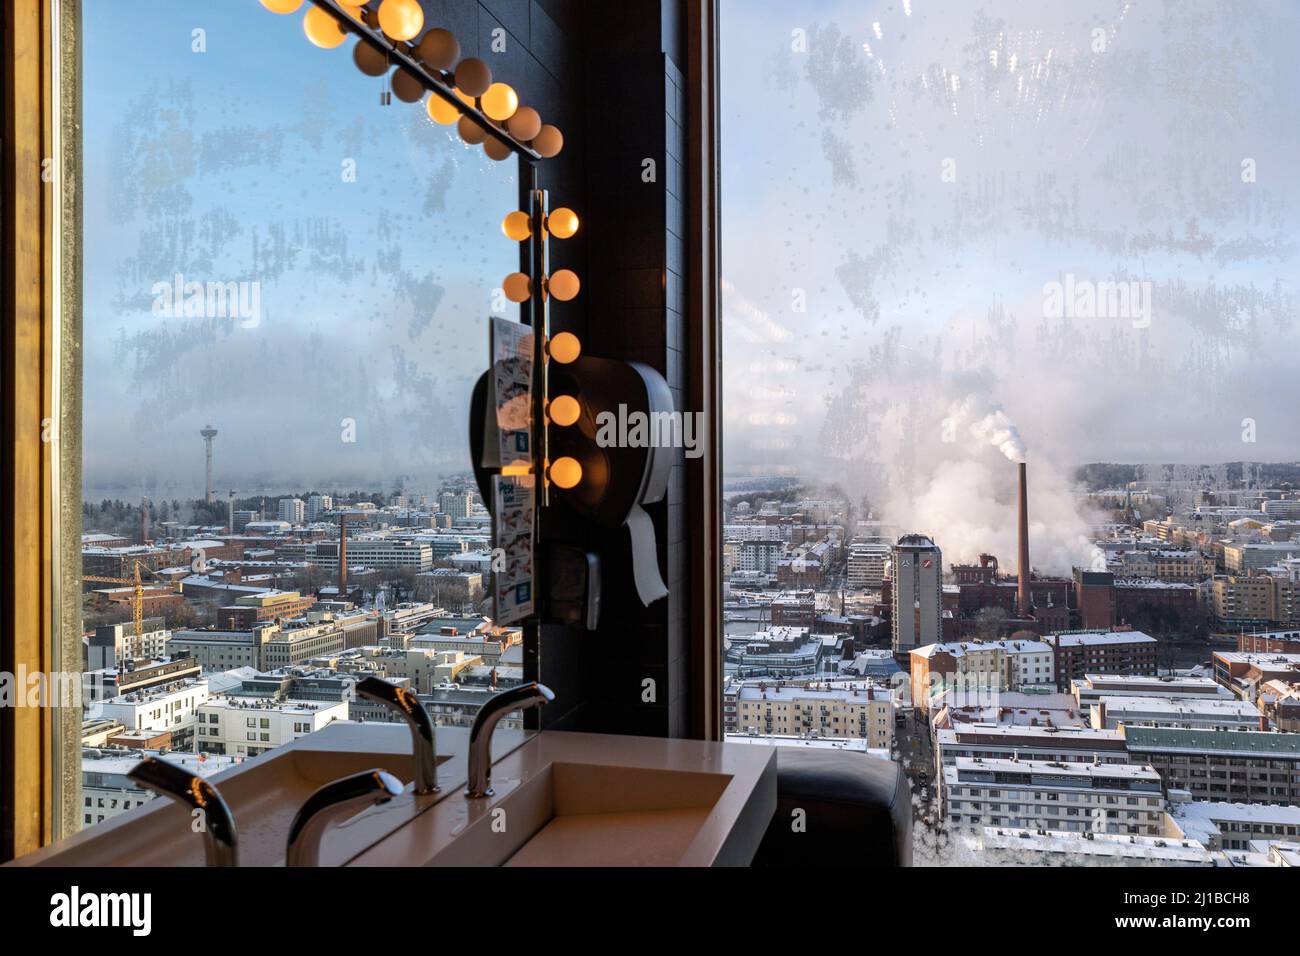 SMOKESTACK OF THE METSA BOARD TAKO PAPERBOARD FACTORY SEEN FROM THE RESTROOMS OF THE PANORAMIC MORO SKY BAR, TAMPERE, FINLAND, EUROPE Stock Photo